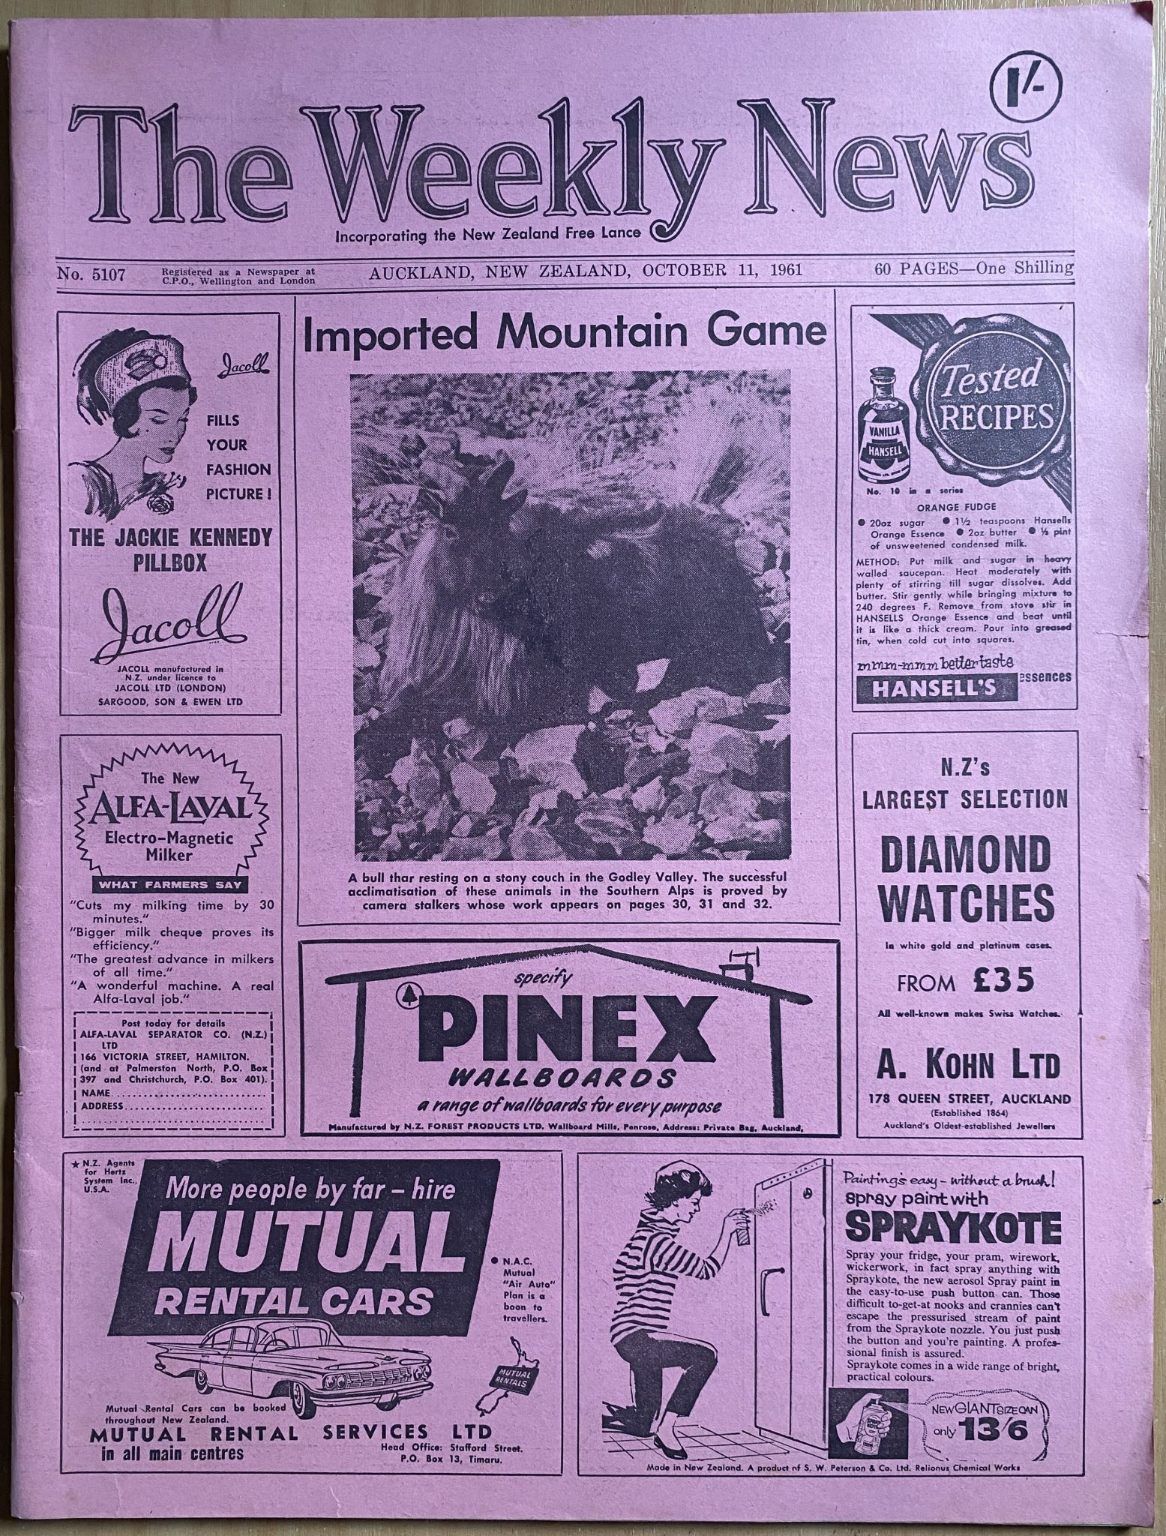 OLD NEWSPAPER: The Weekly News, No. 5107, 11 October 1961